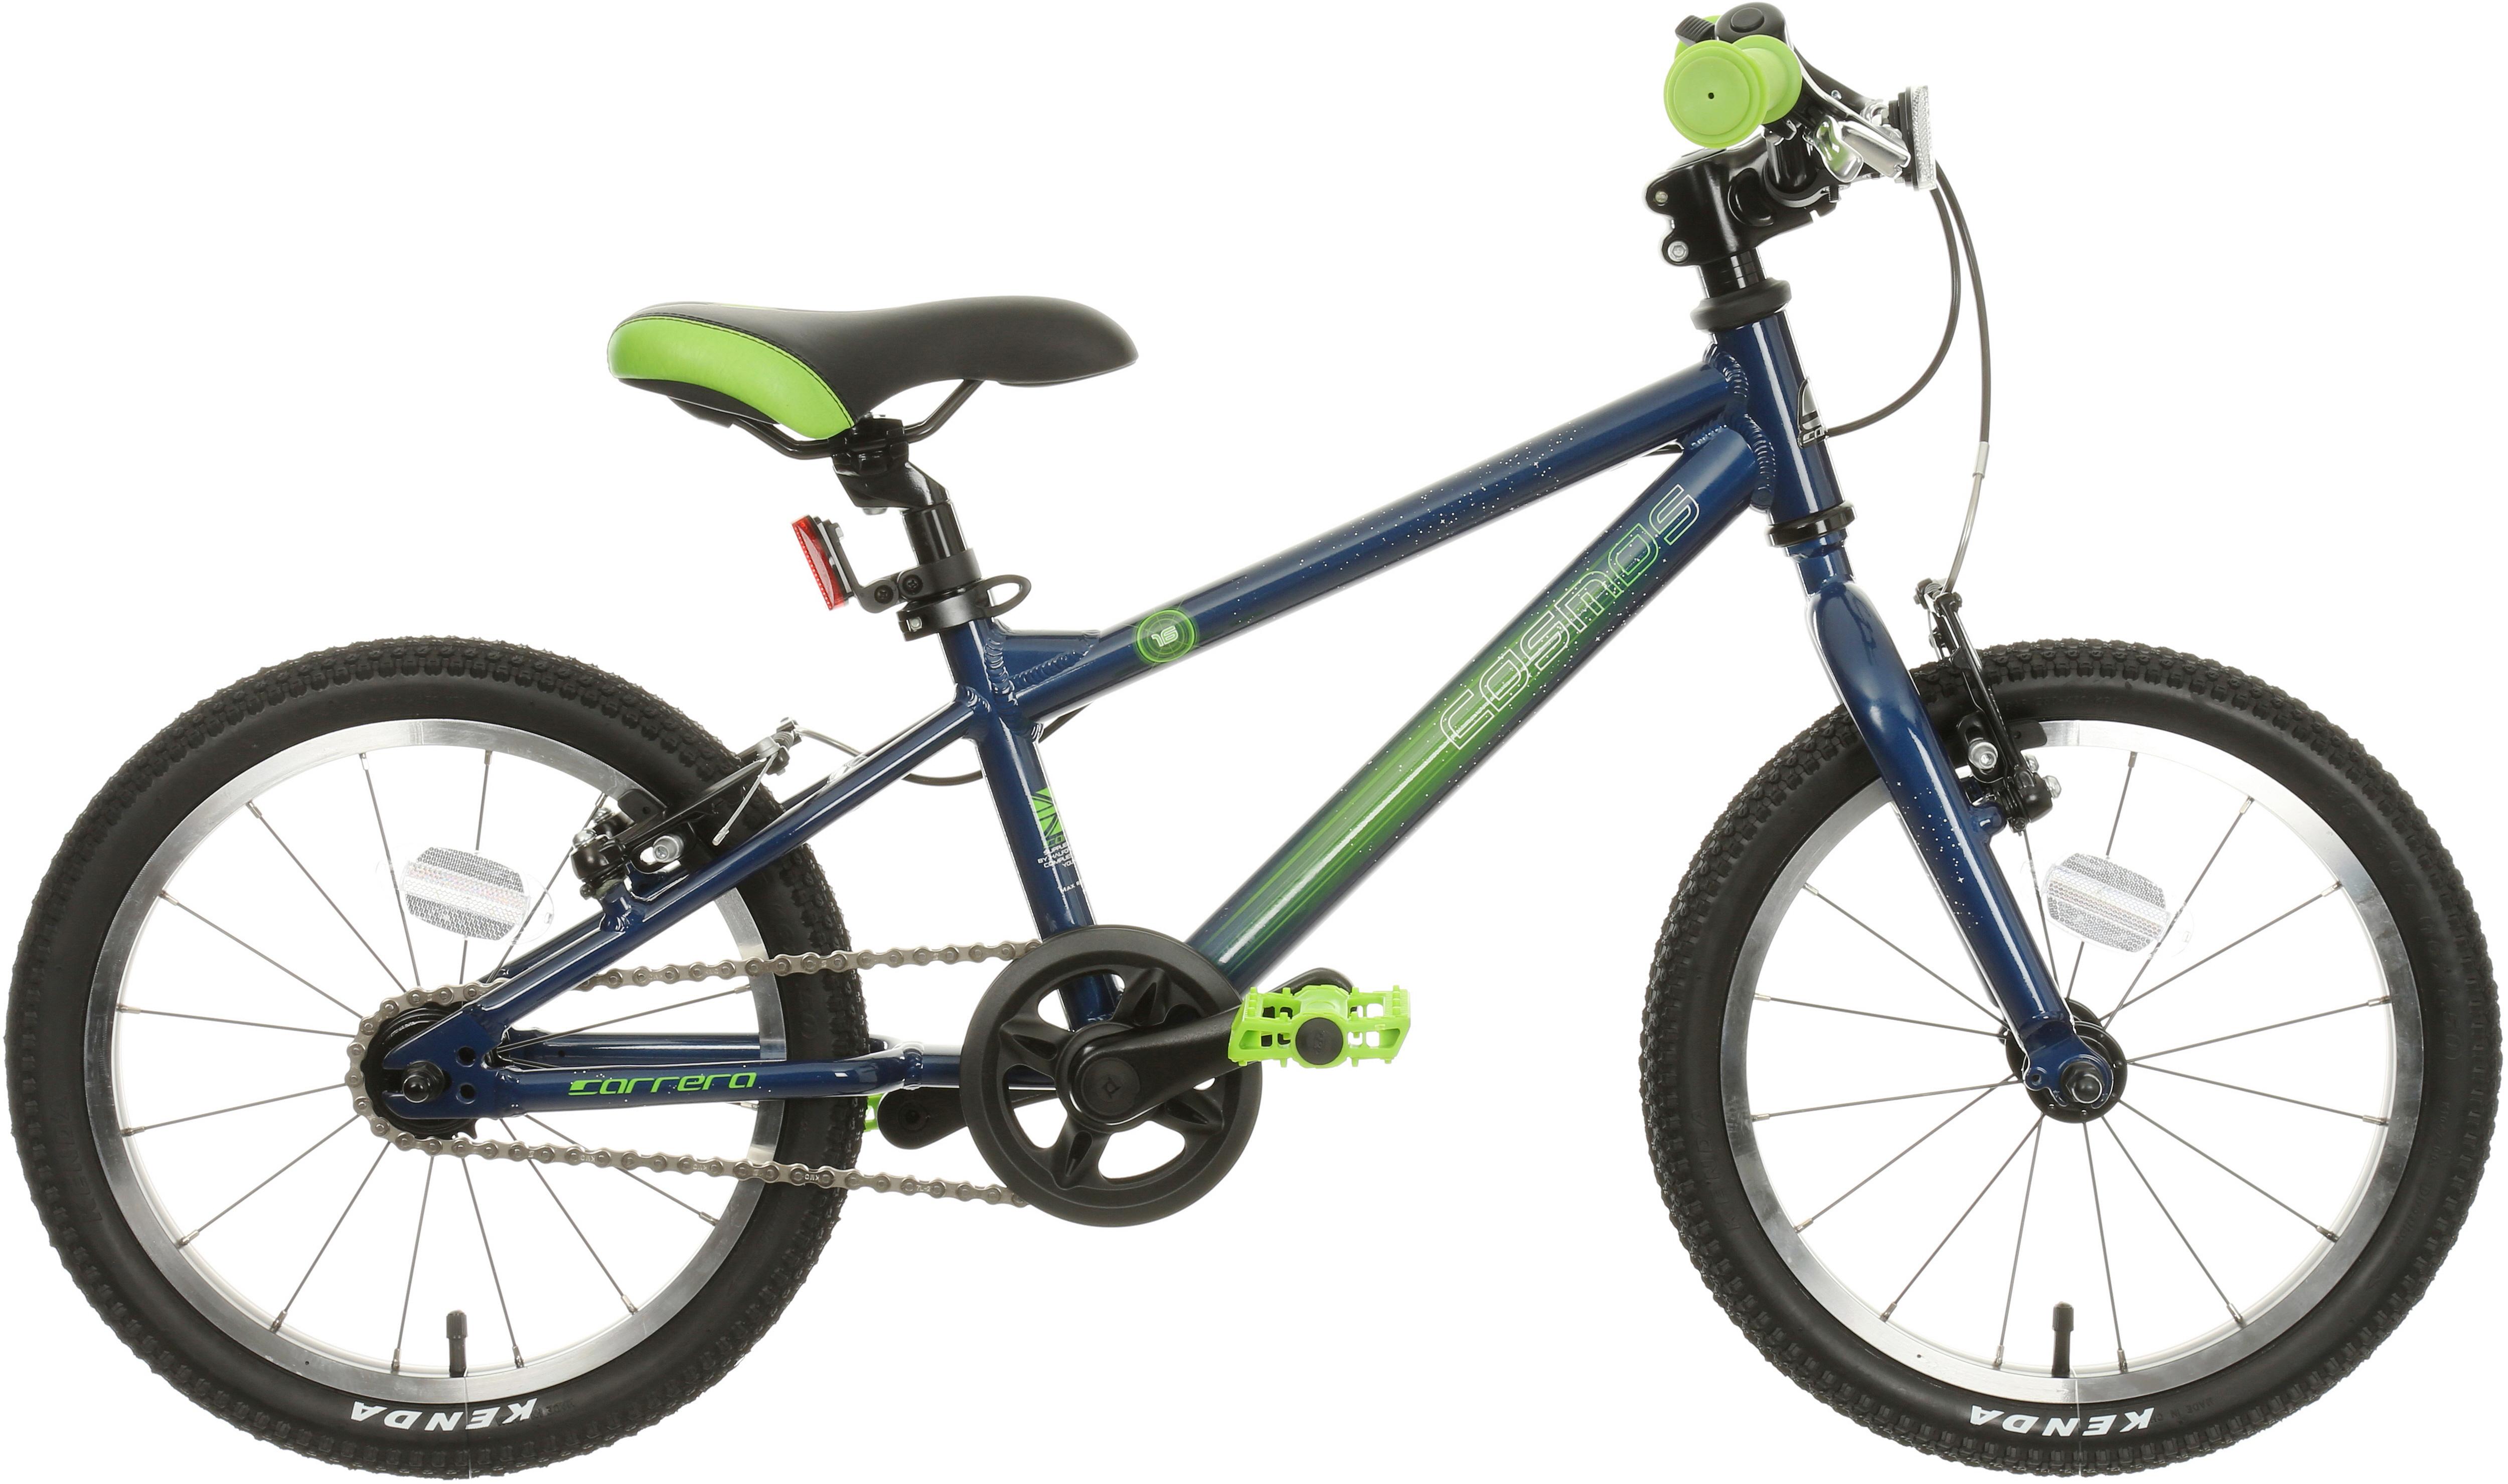 what's the best size bike for a 6 year old